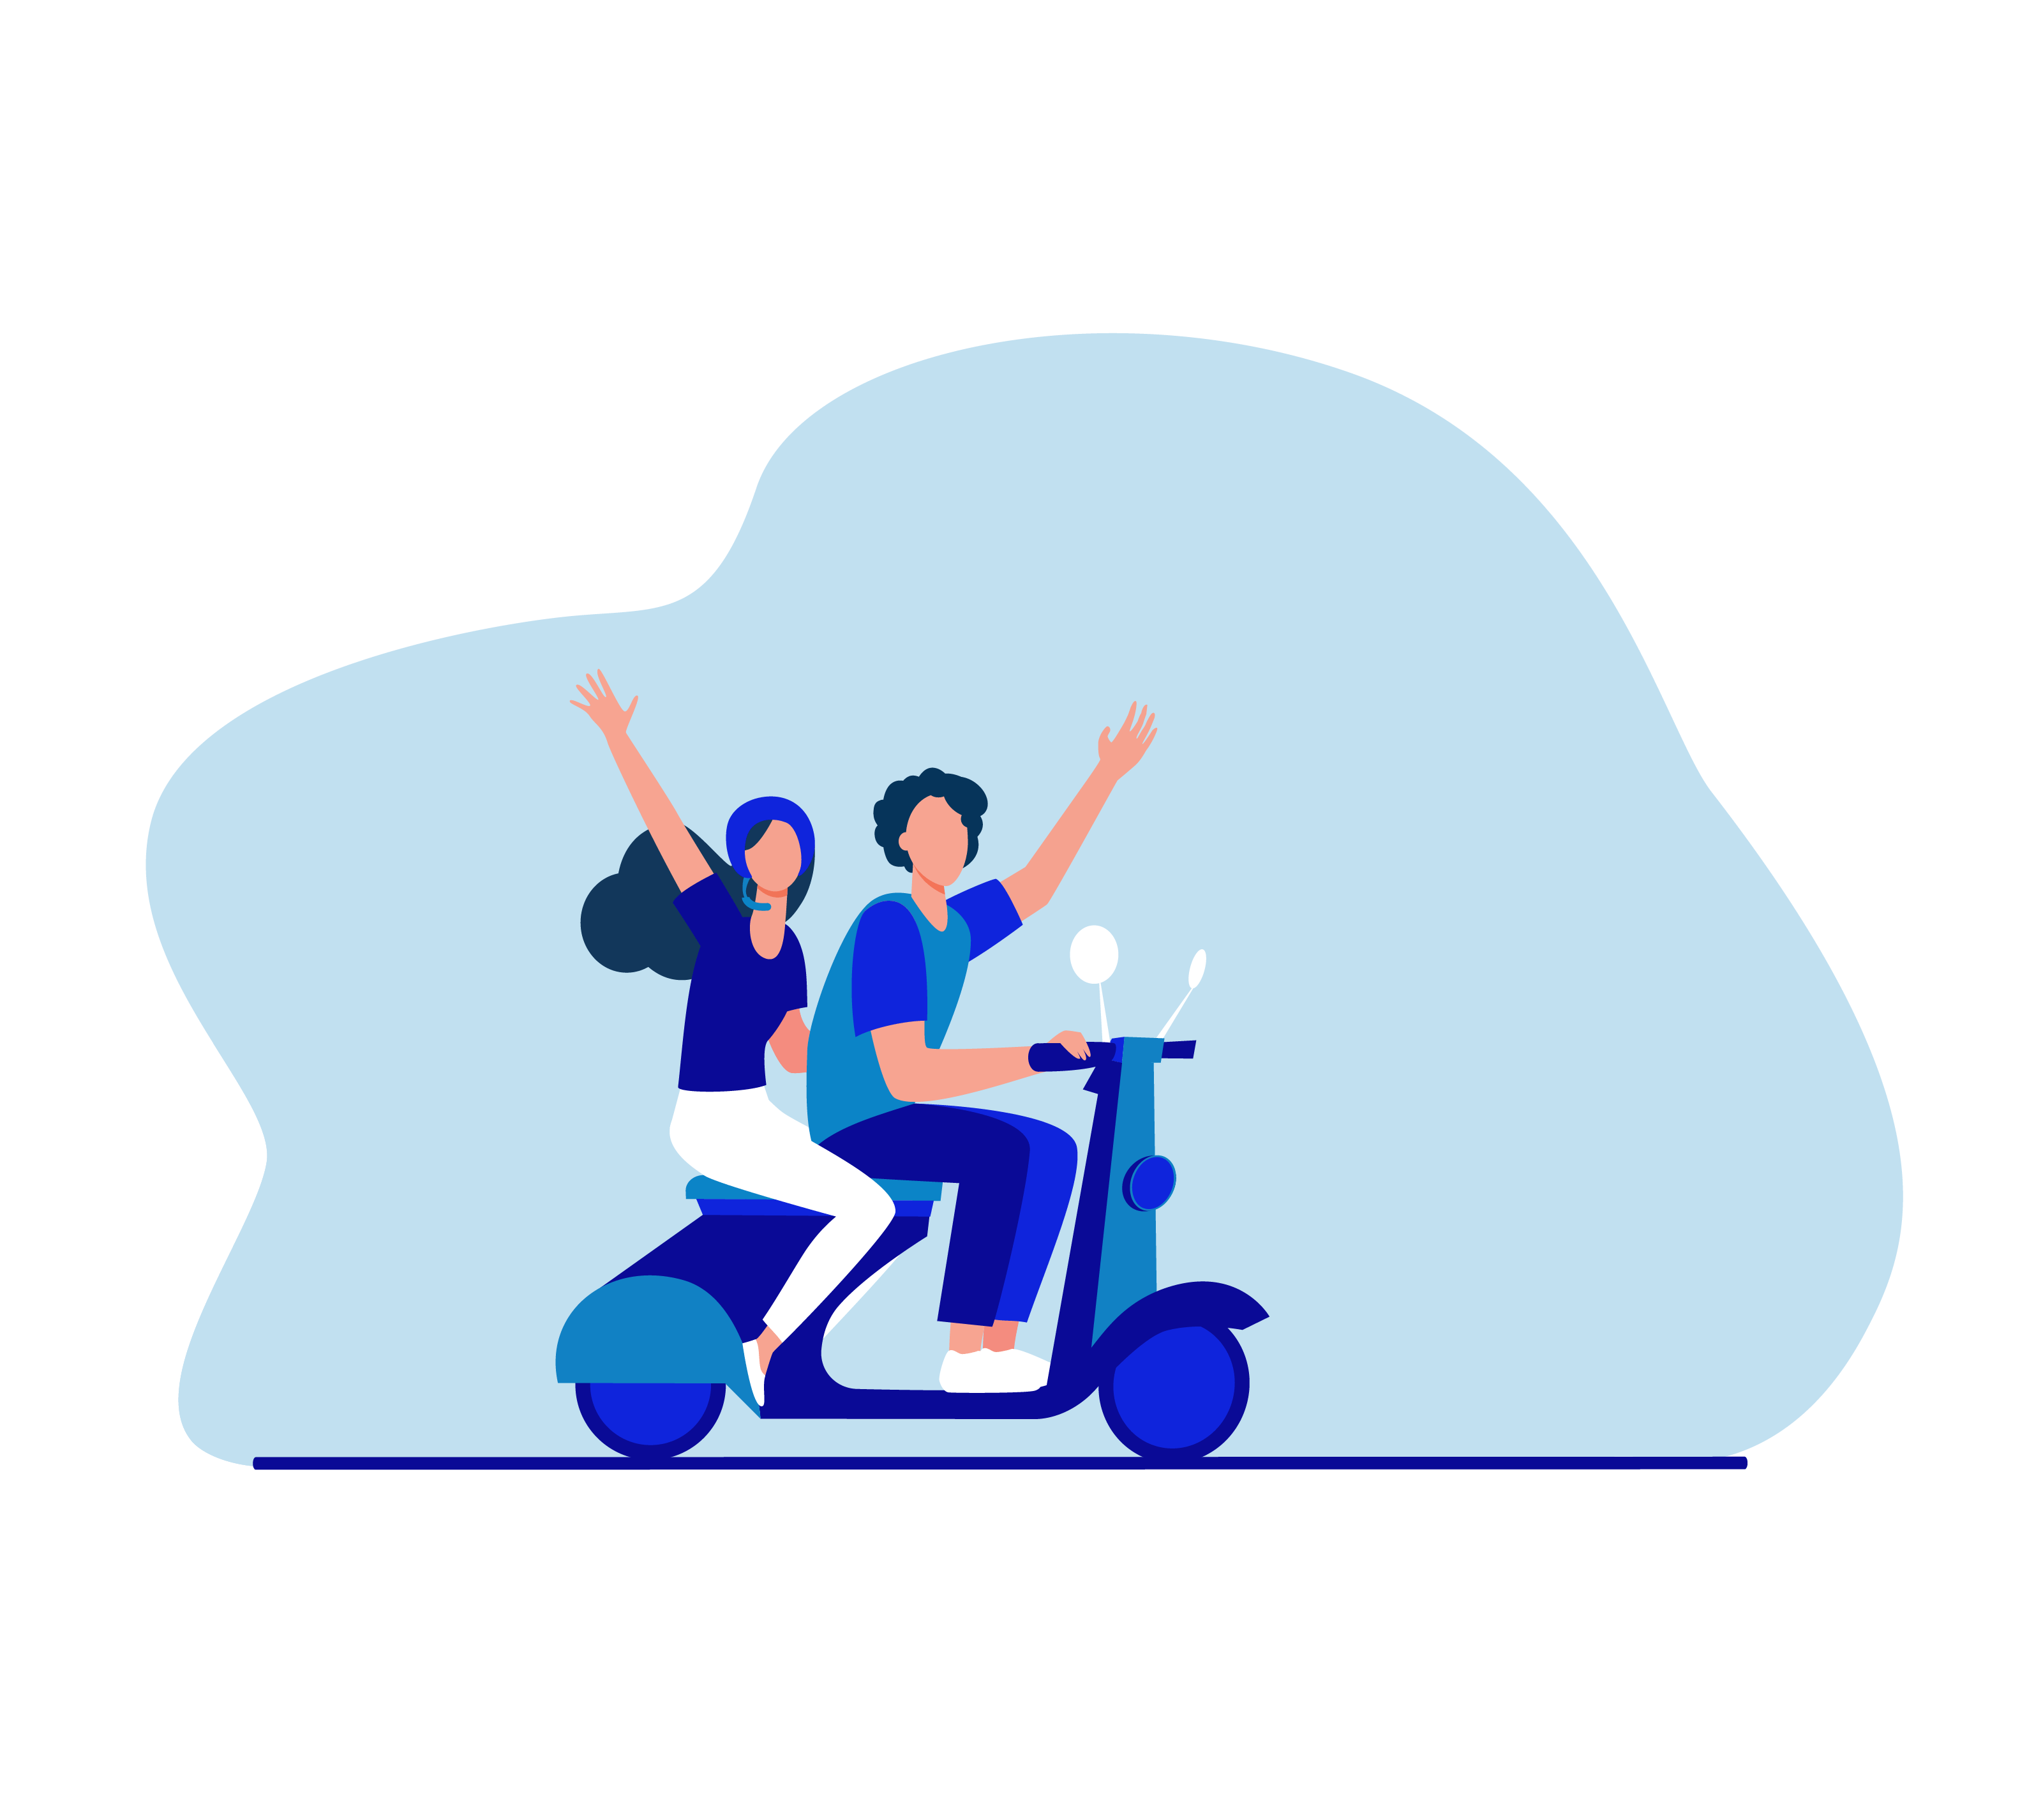 Illustration of people riding a scooter